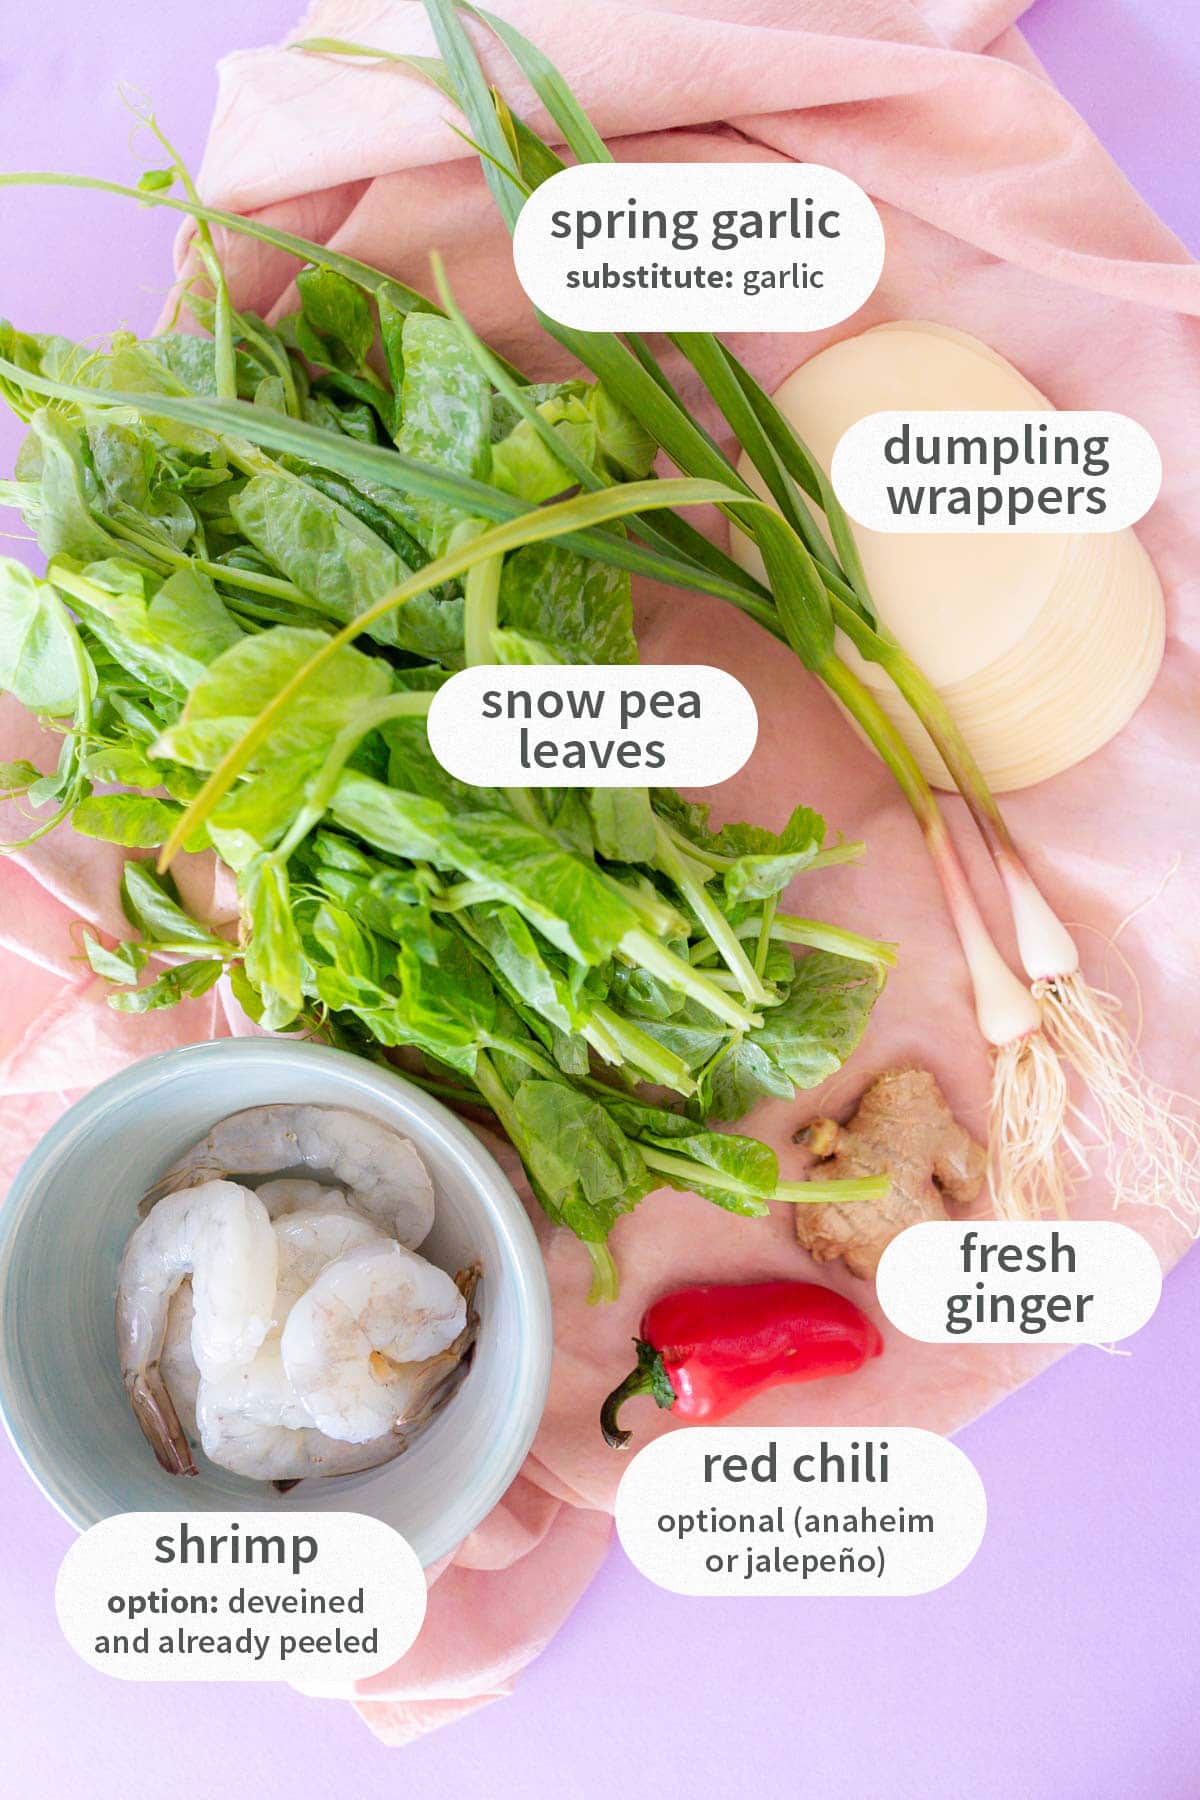 Top down view of labeled ingredients for snow pea leaves and shrimp dumplings: shrimp (option: deveined and already peeled), snow pea leaves, spring garlic (substitute: garlic), dumpling wrappers, fresh ginger, red chili (optional anaheim or jalepeño).